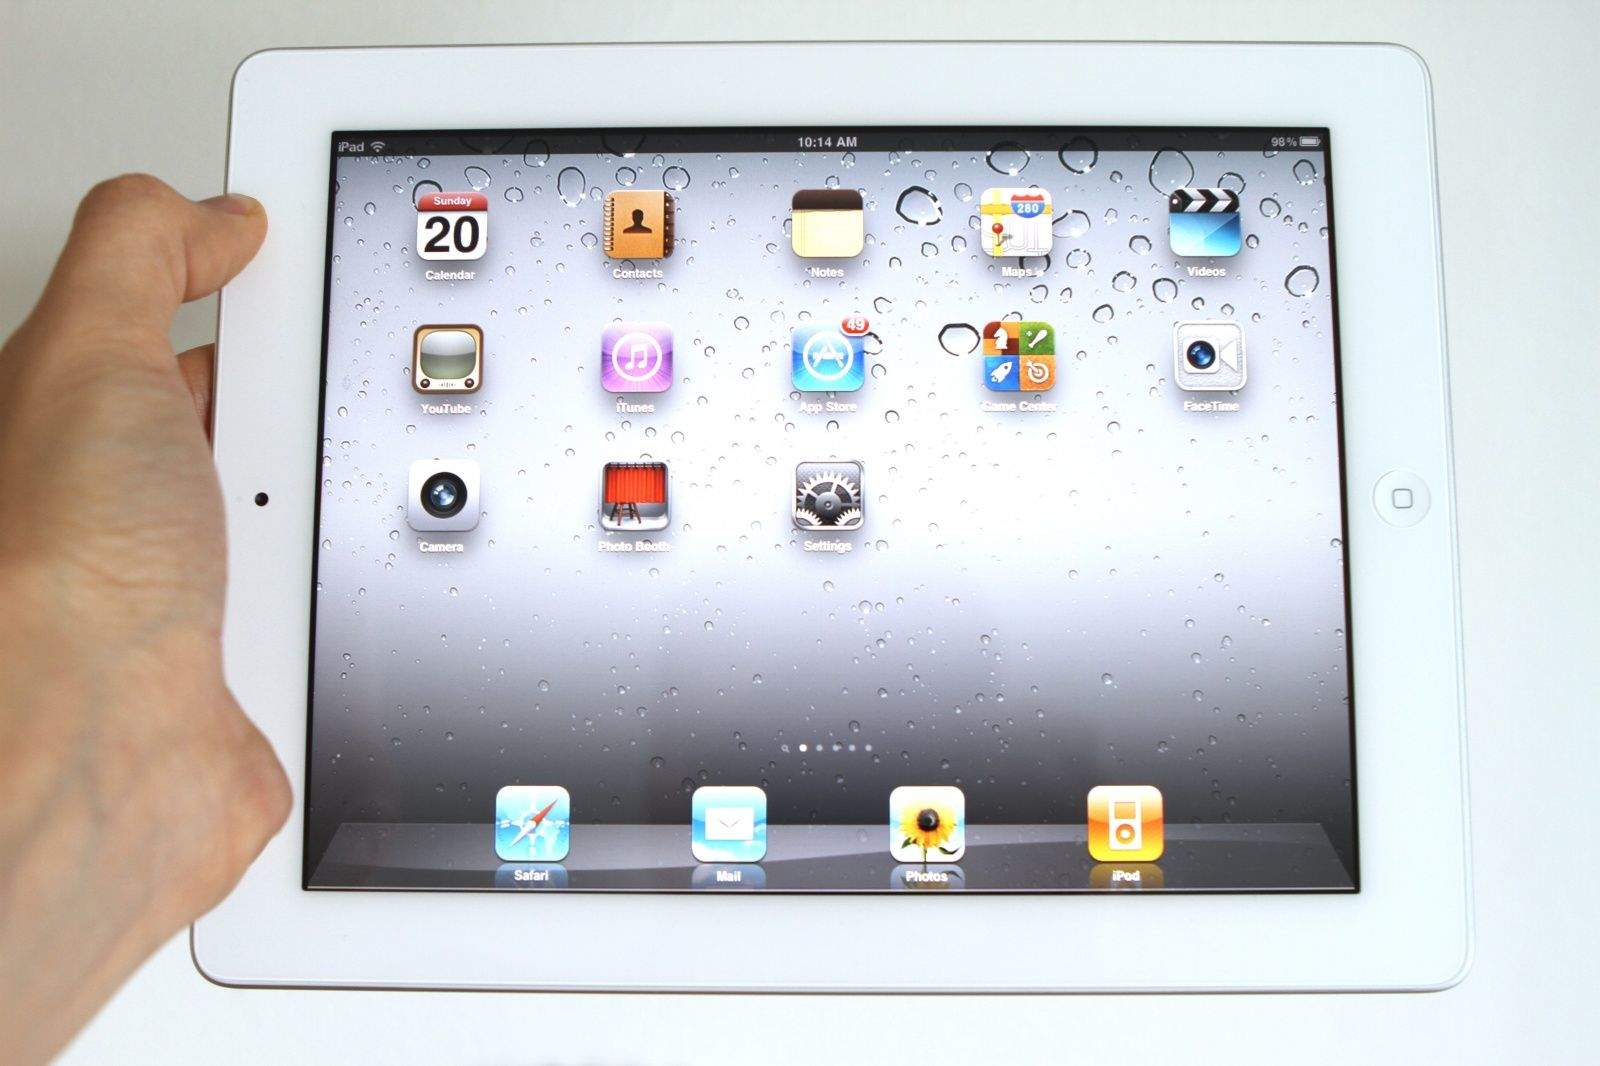 apple-ipad-2-review-hands-on-10